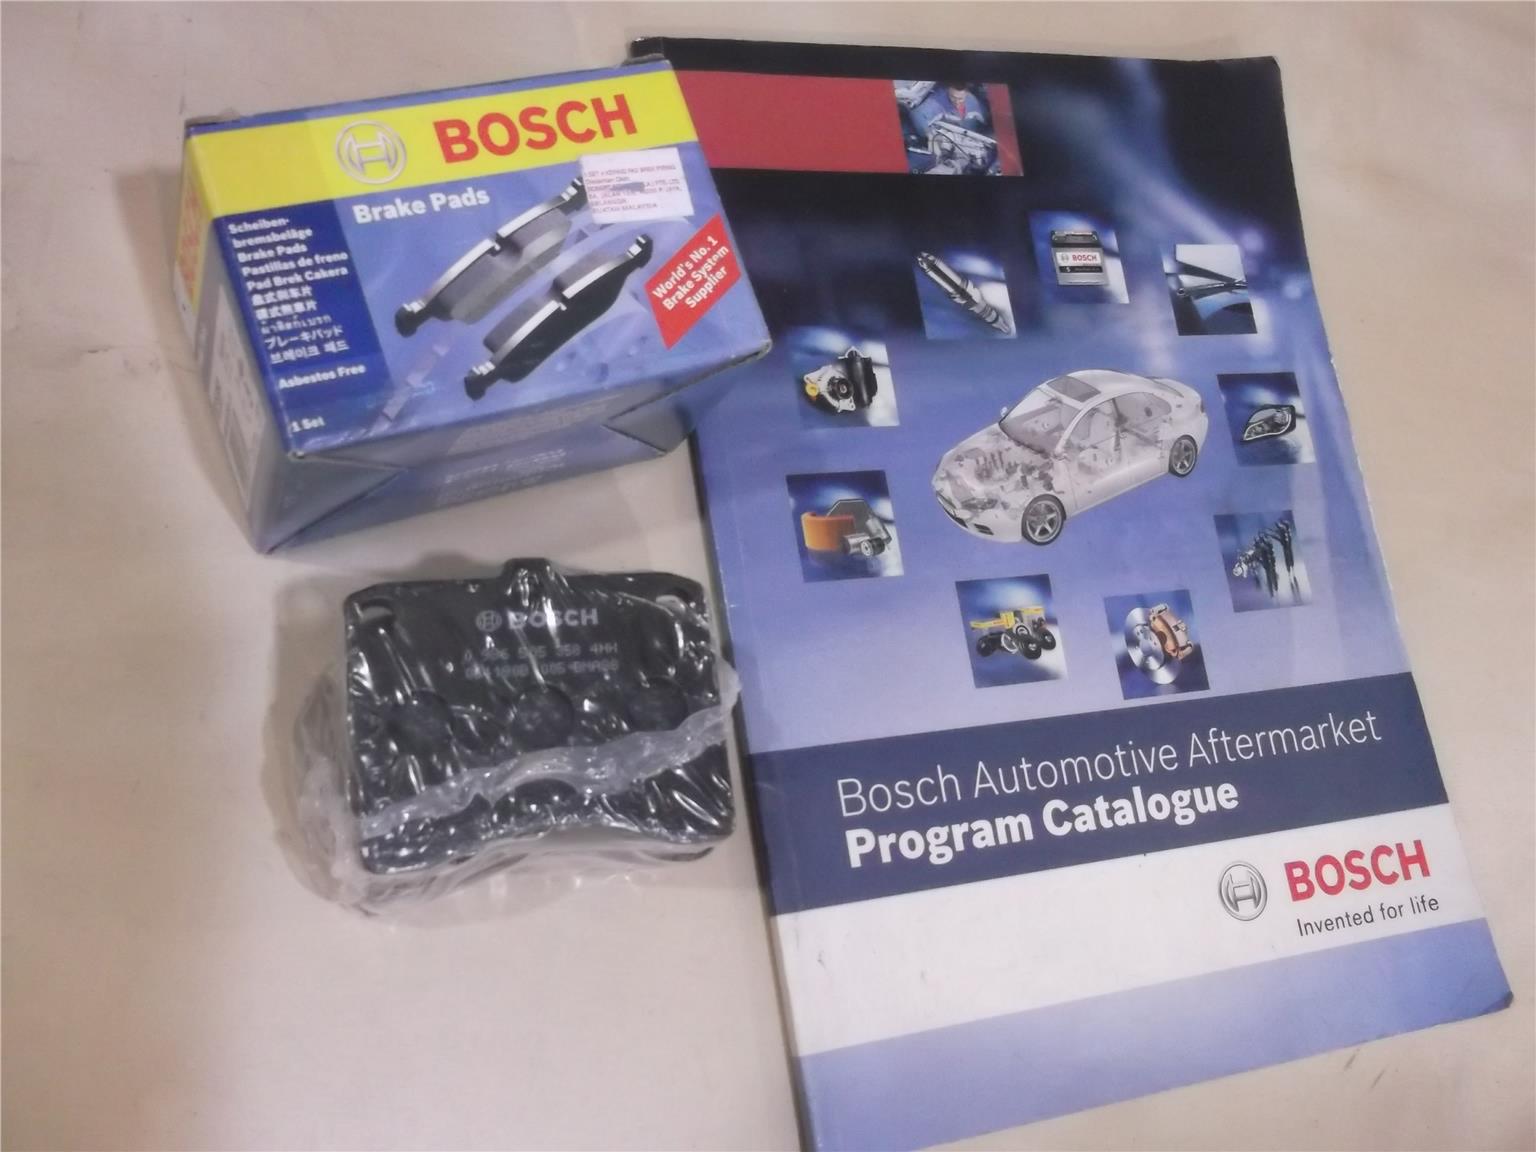 BOSCH FRONT BRAKE PAD for KANCIL 85 (end 12/17/2017 8:15 PM)